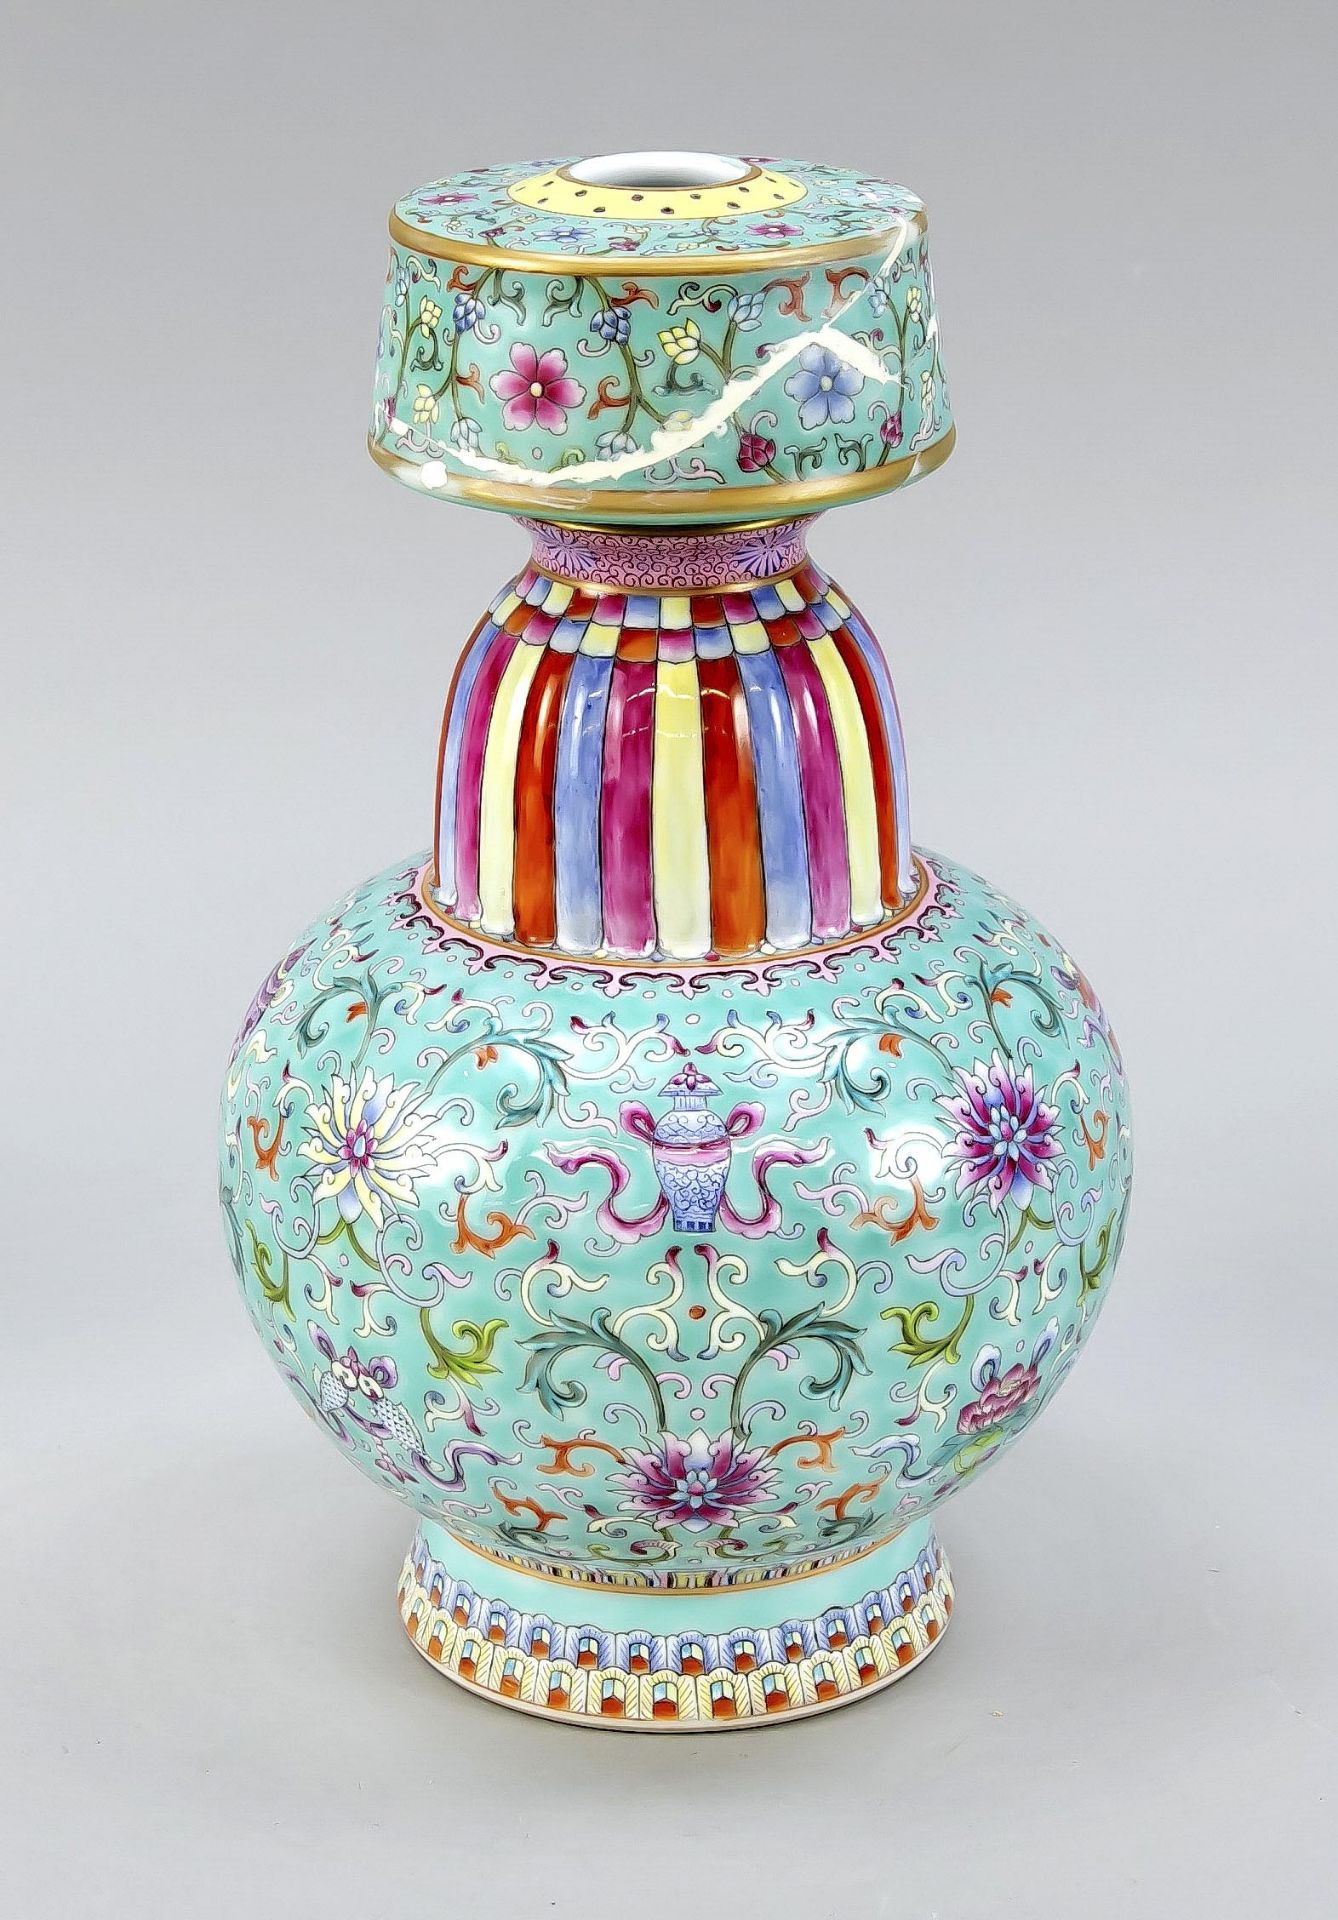 Tibet-style Famille Rose vase (Benbaping), China, 19th/20th c., consisting of 2 parts. Depiction